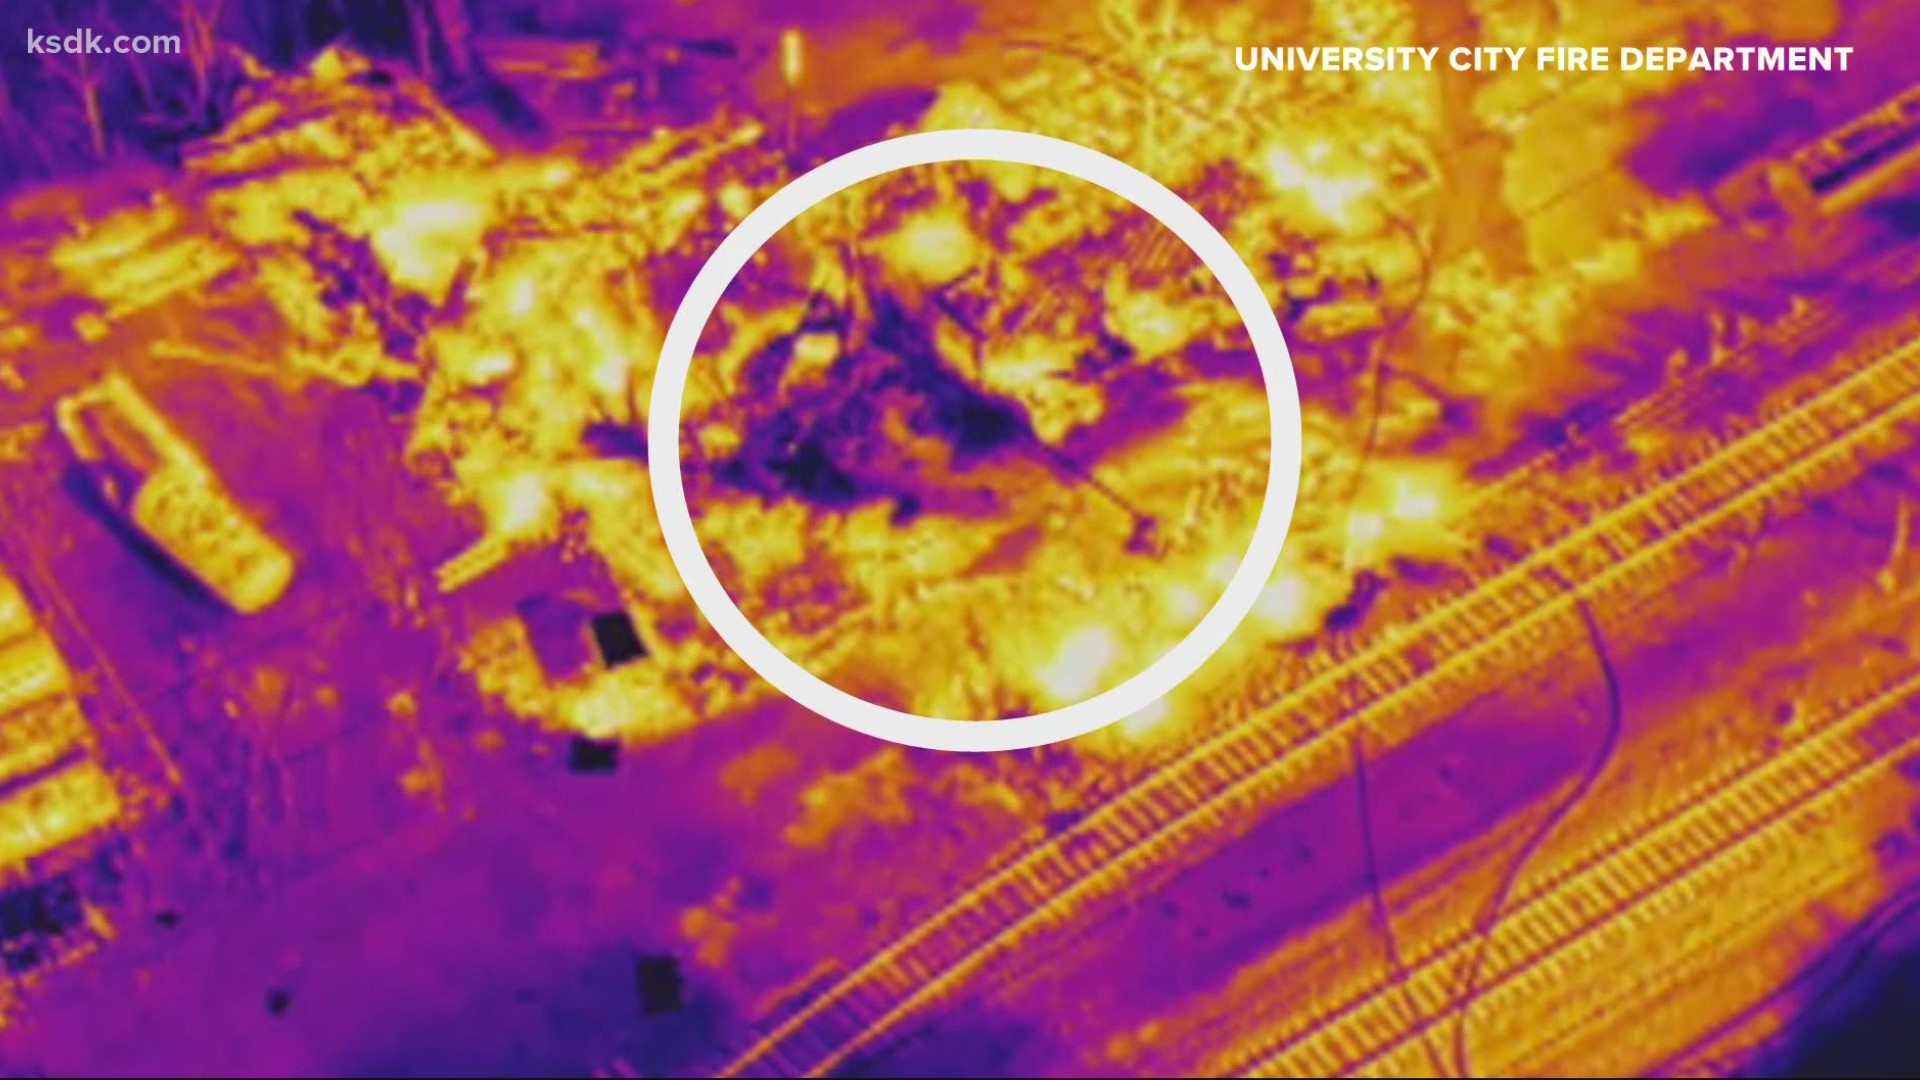 Thermal images from a drone helped firefighters battle the flames from the Affton chemical plant explosion. The investigation and cleanup began at the site.